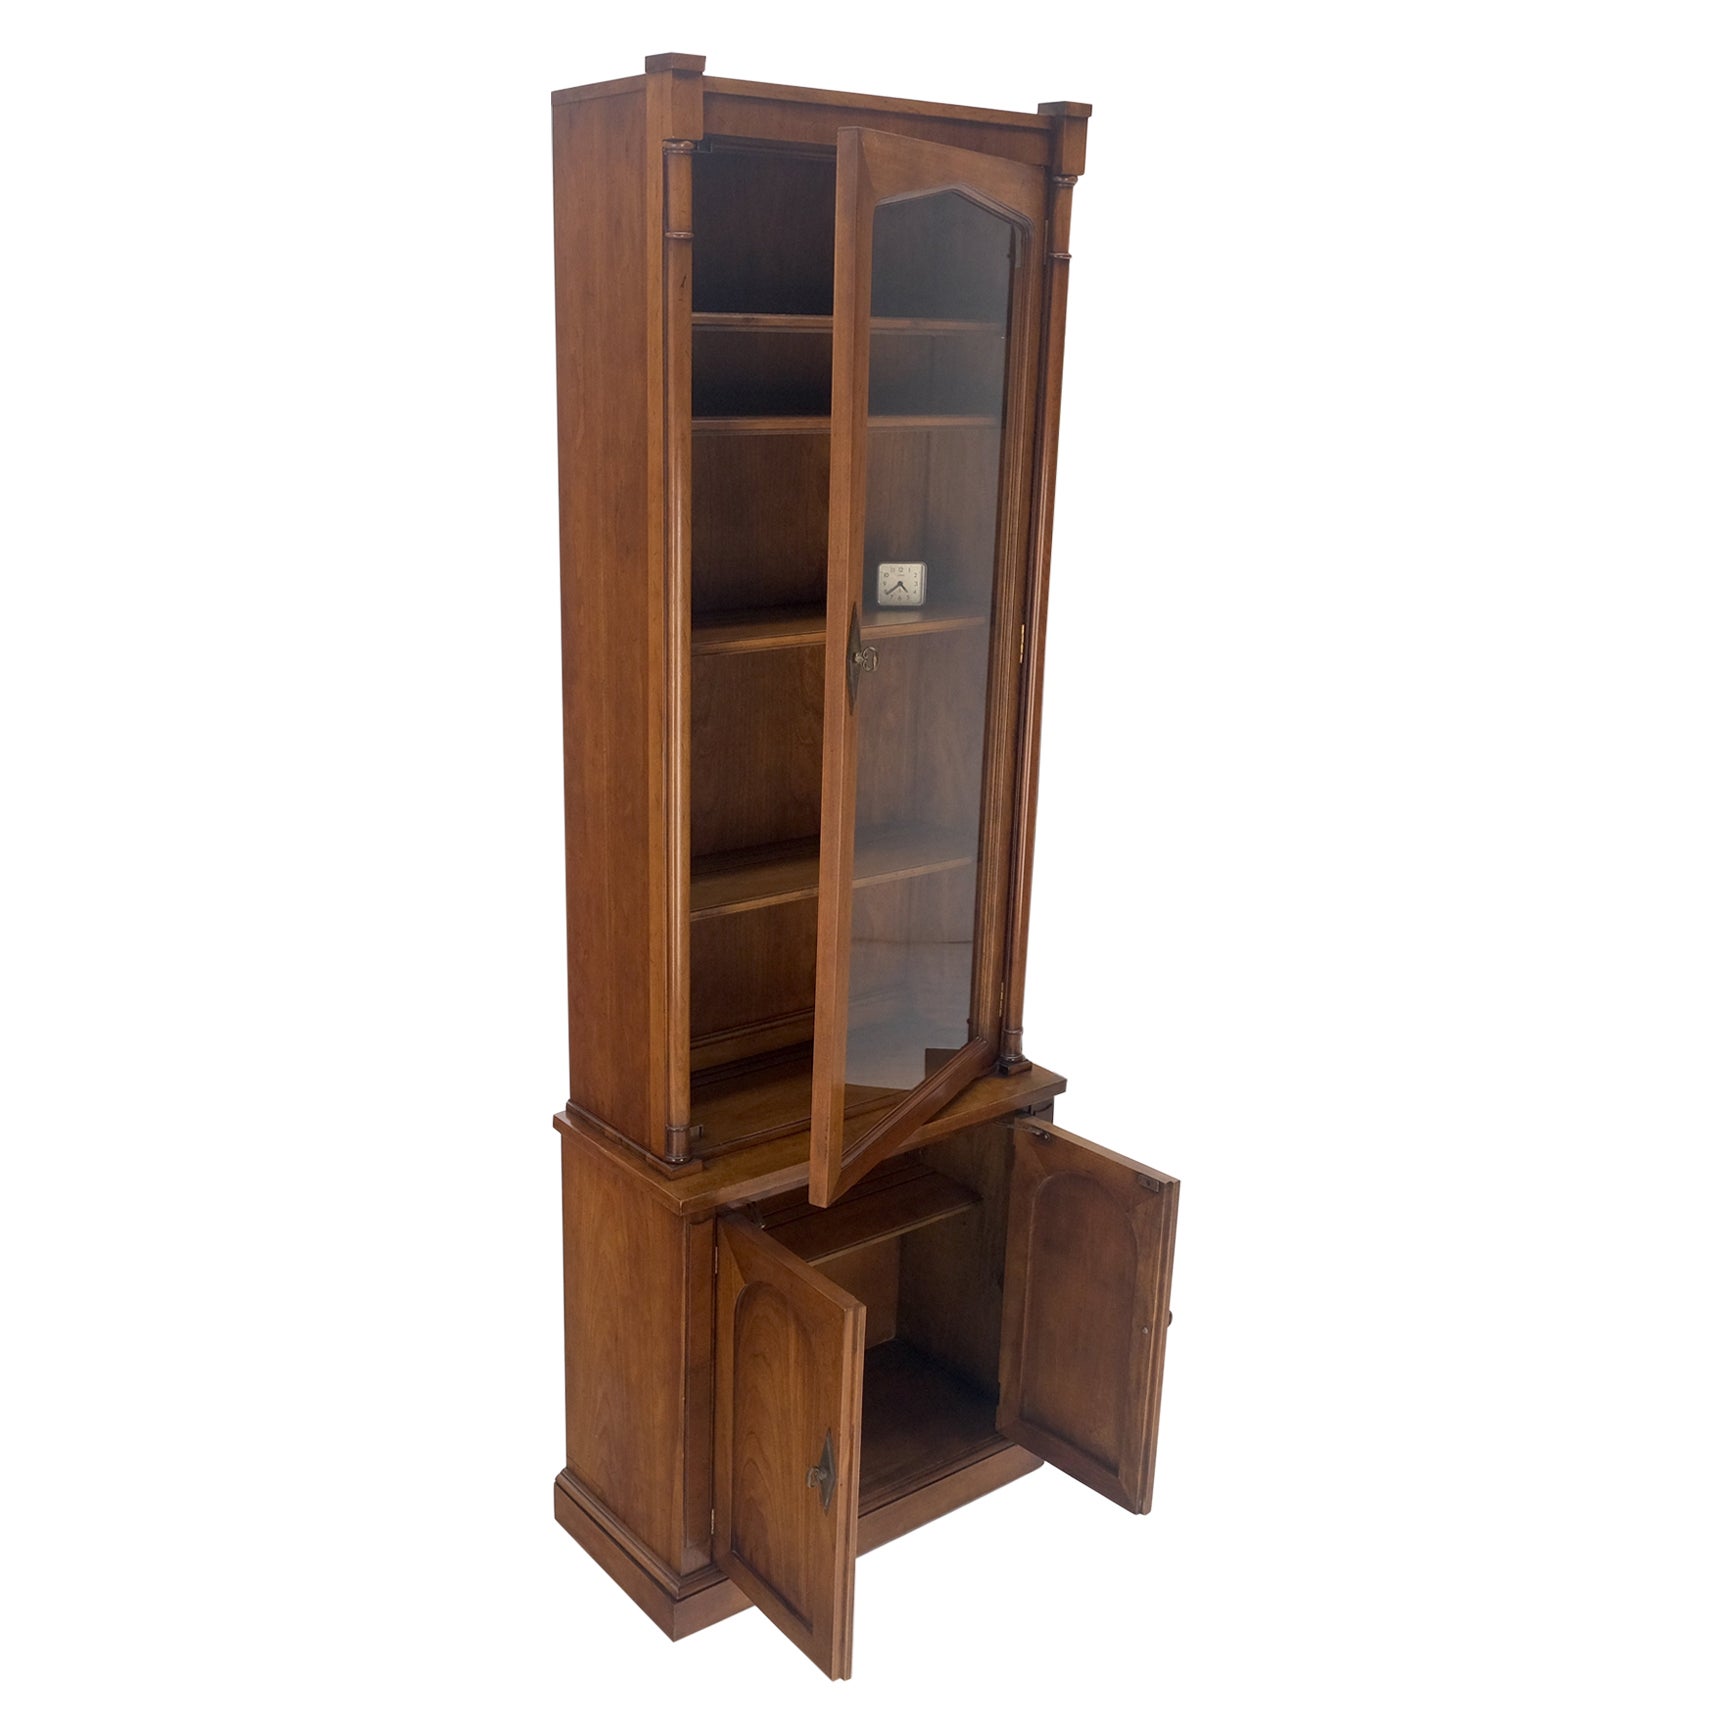 Single Glass Door Solid Cherry Tall Bookcase Cupboard Bottom Compartment MINT! For Sale